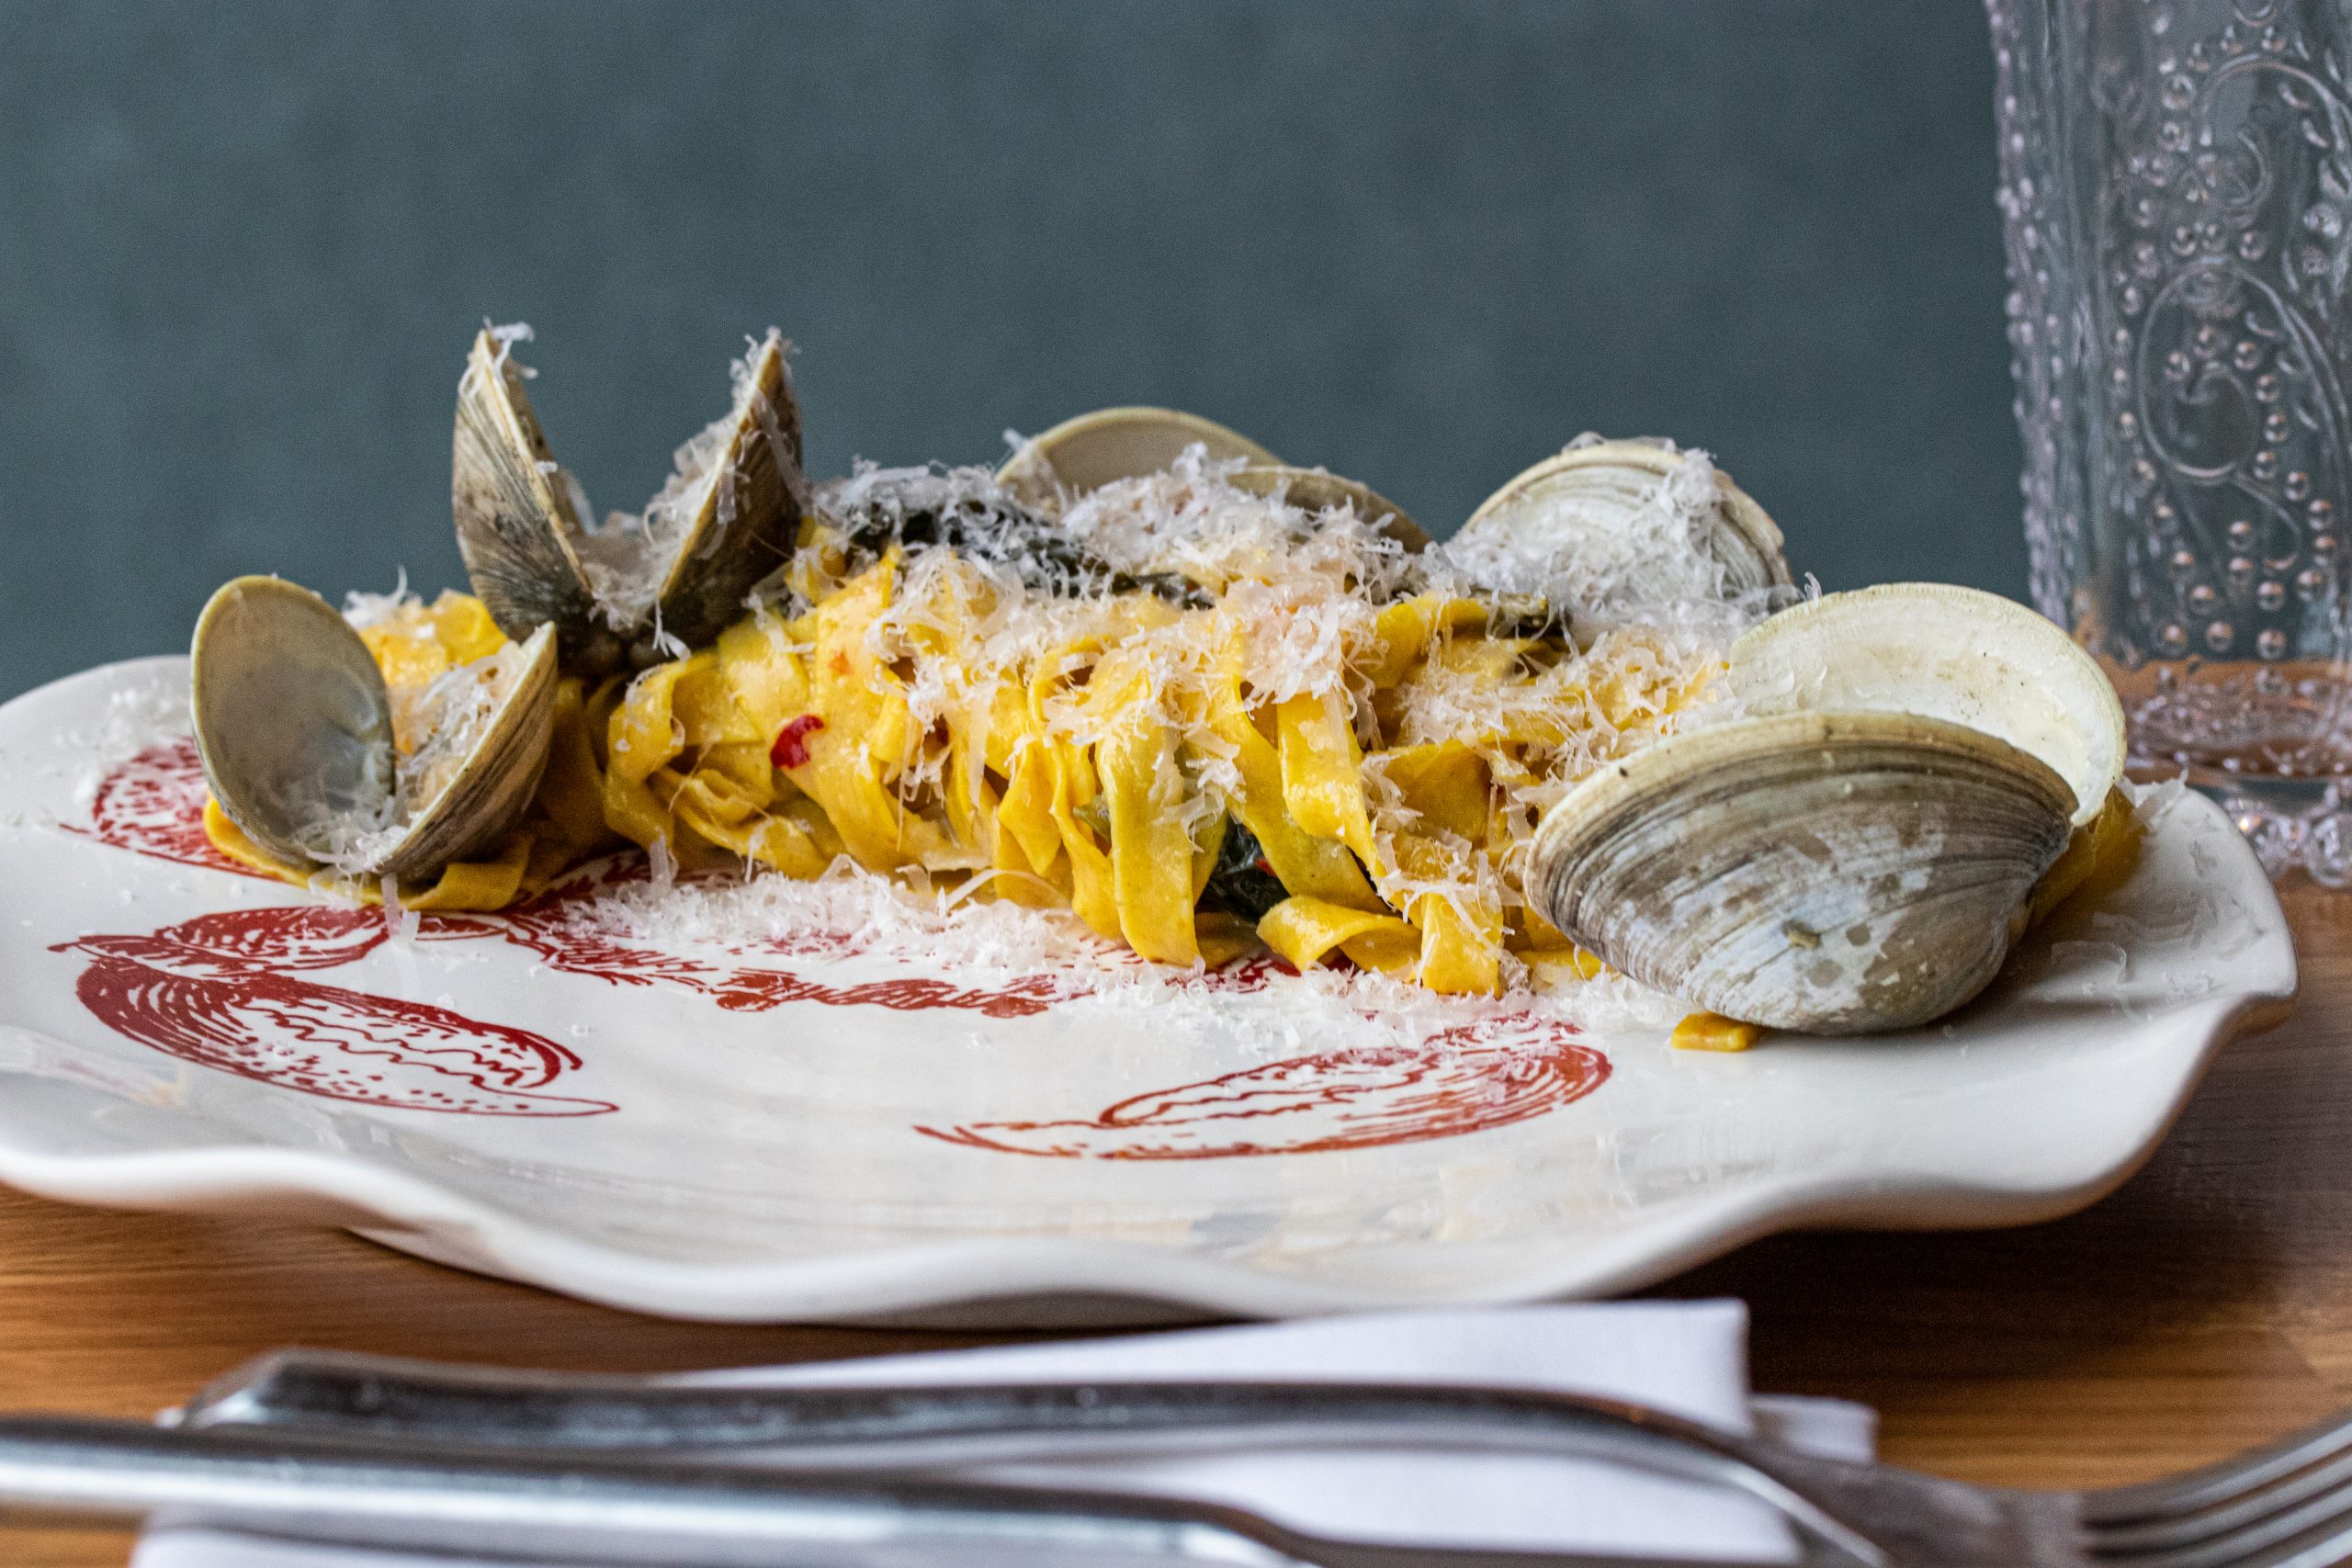 Saffron tagliatelle with clams from Opal in Washington, D.C.